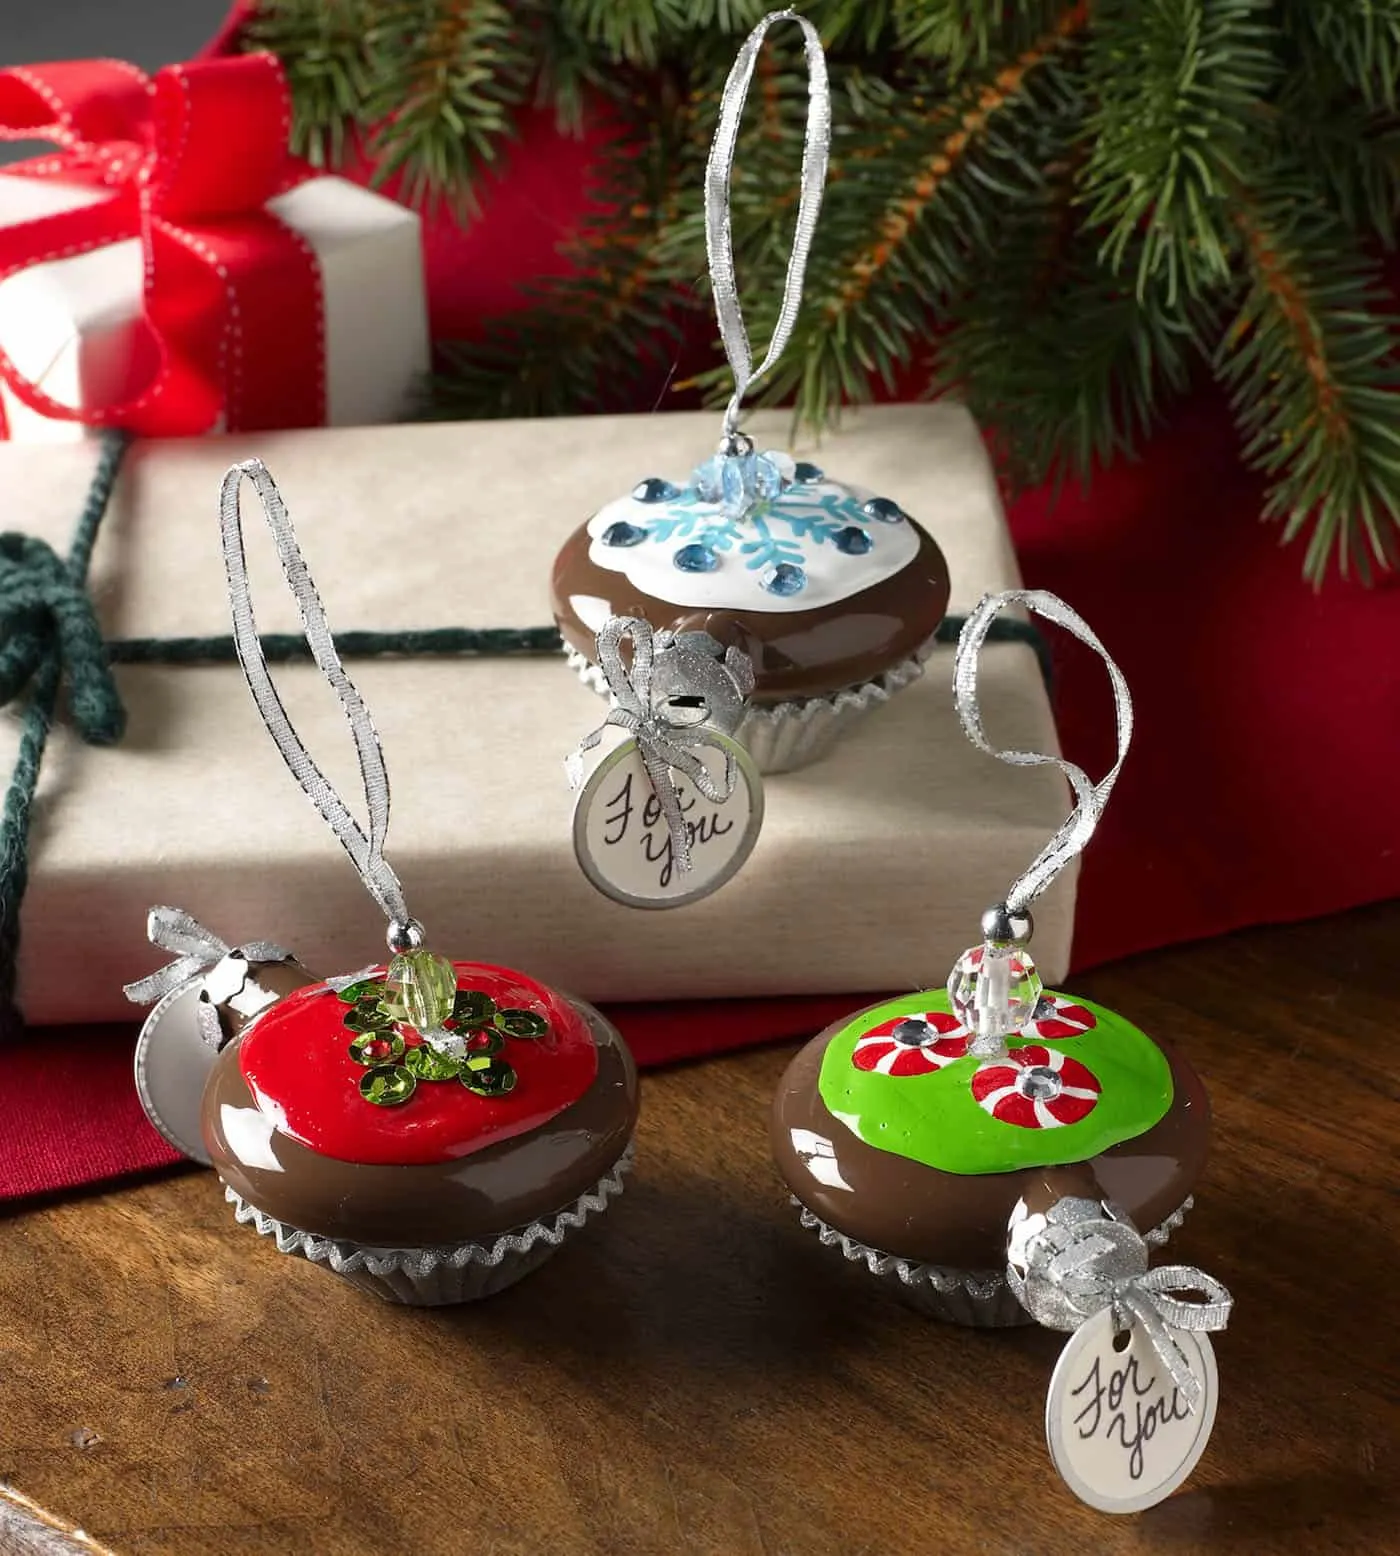 These handmade Christmas ornaments are regular ornaments painted to look just like cupcakes! Have you ever seen anything so sweet?